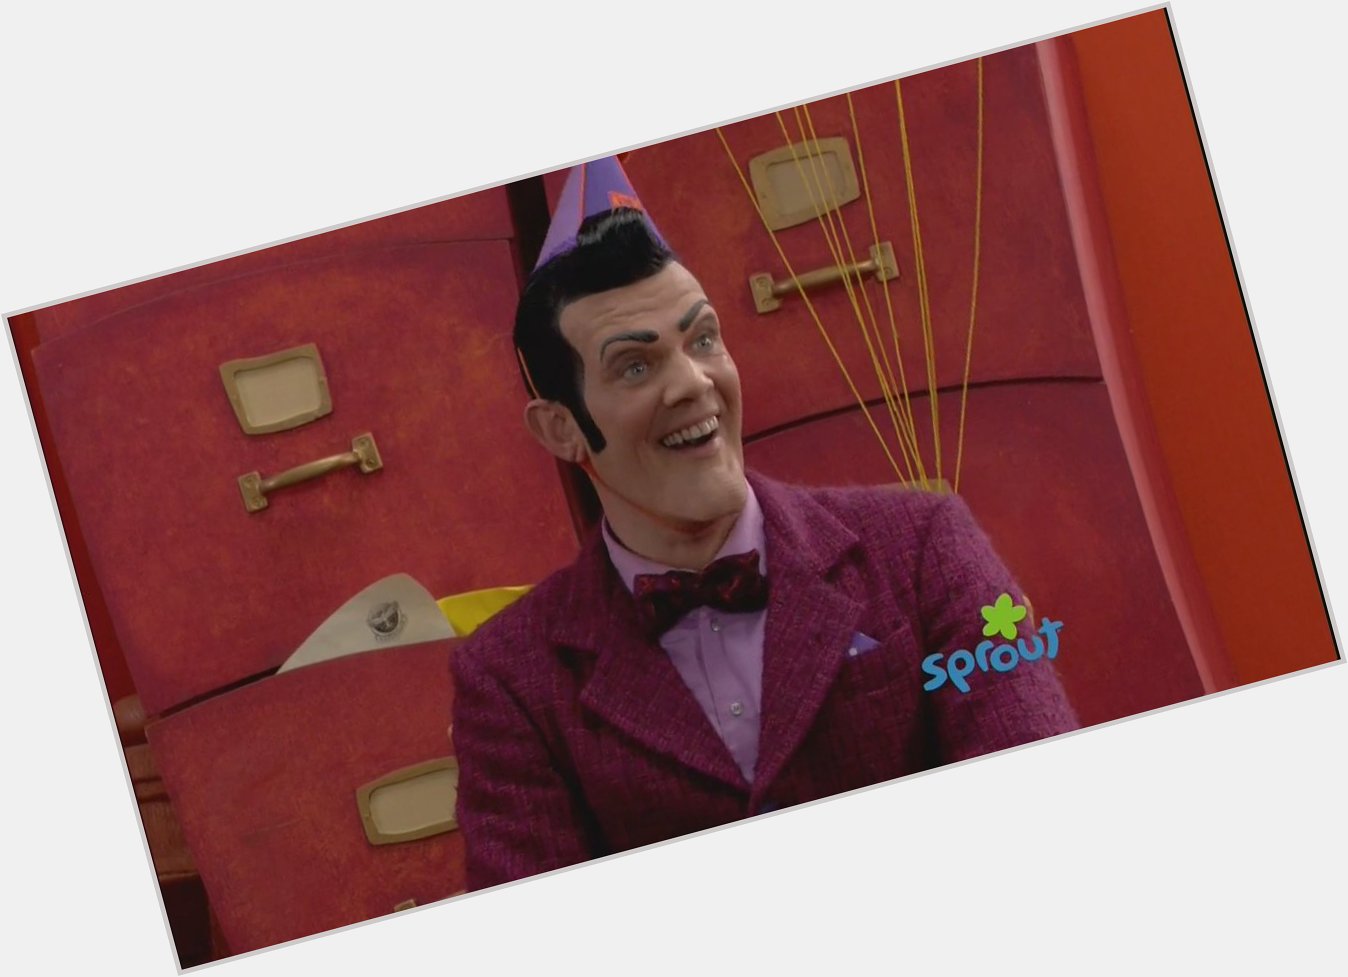 Happy birthday, Stefán Karl Stefánsson. You\re number one in our hearts! 